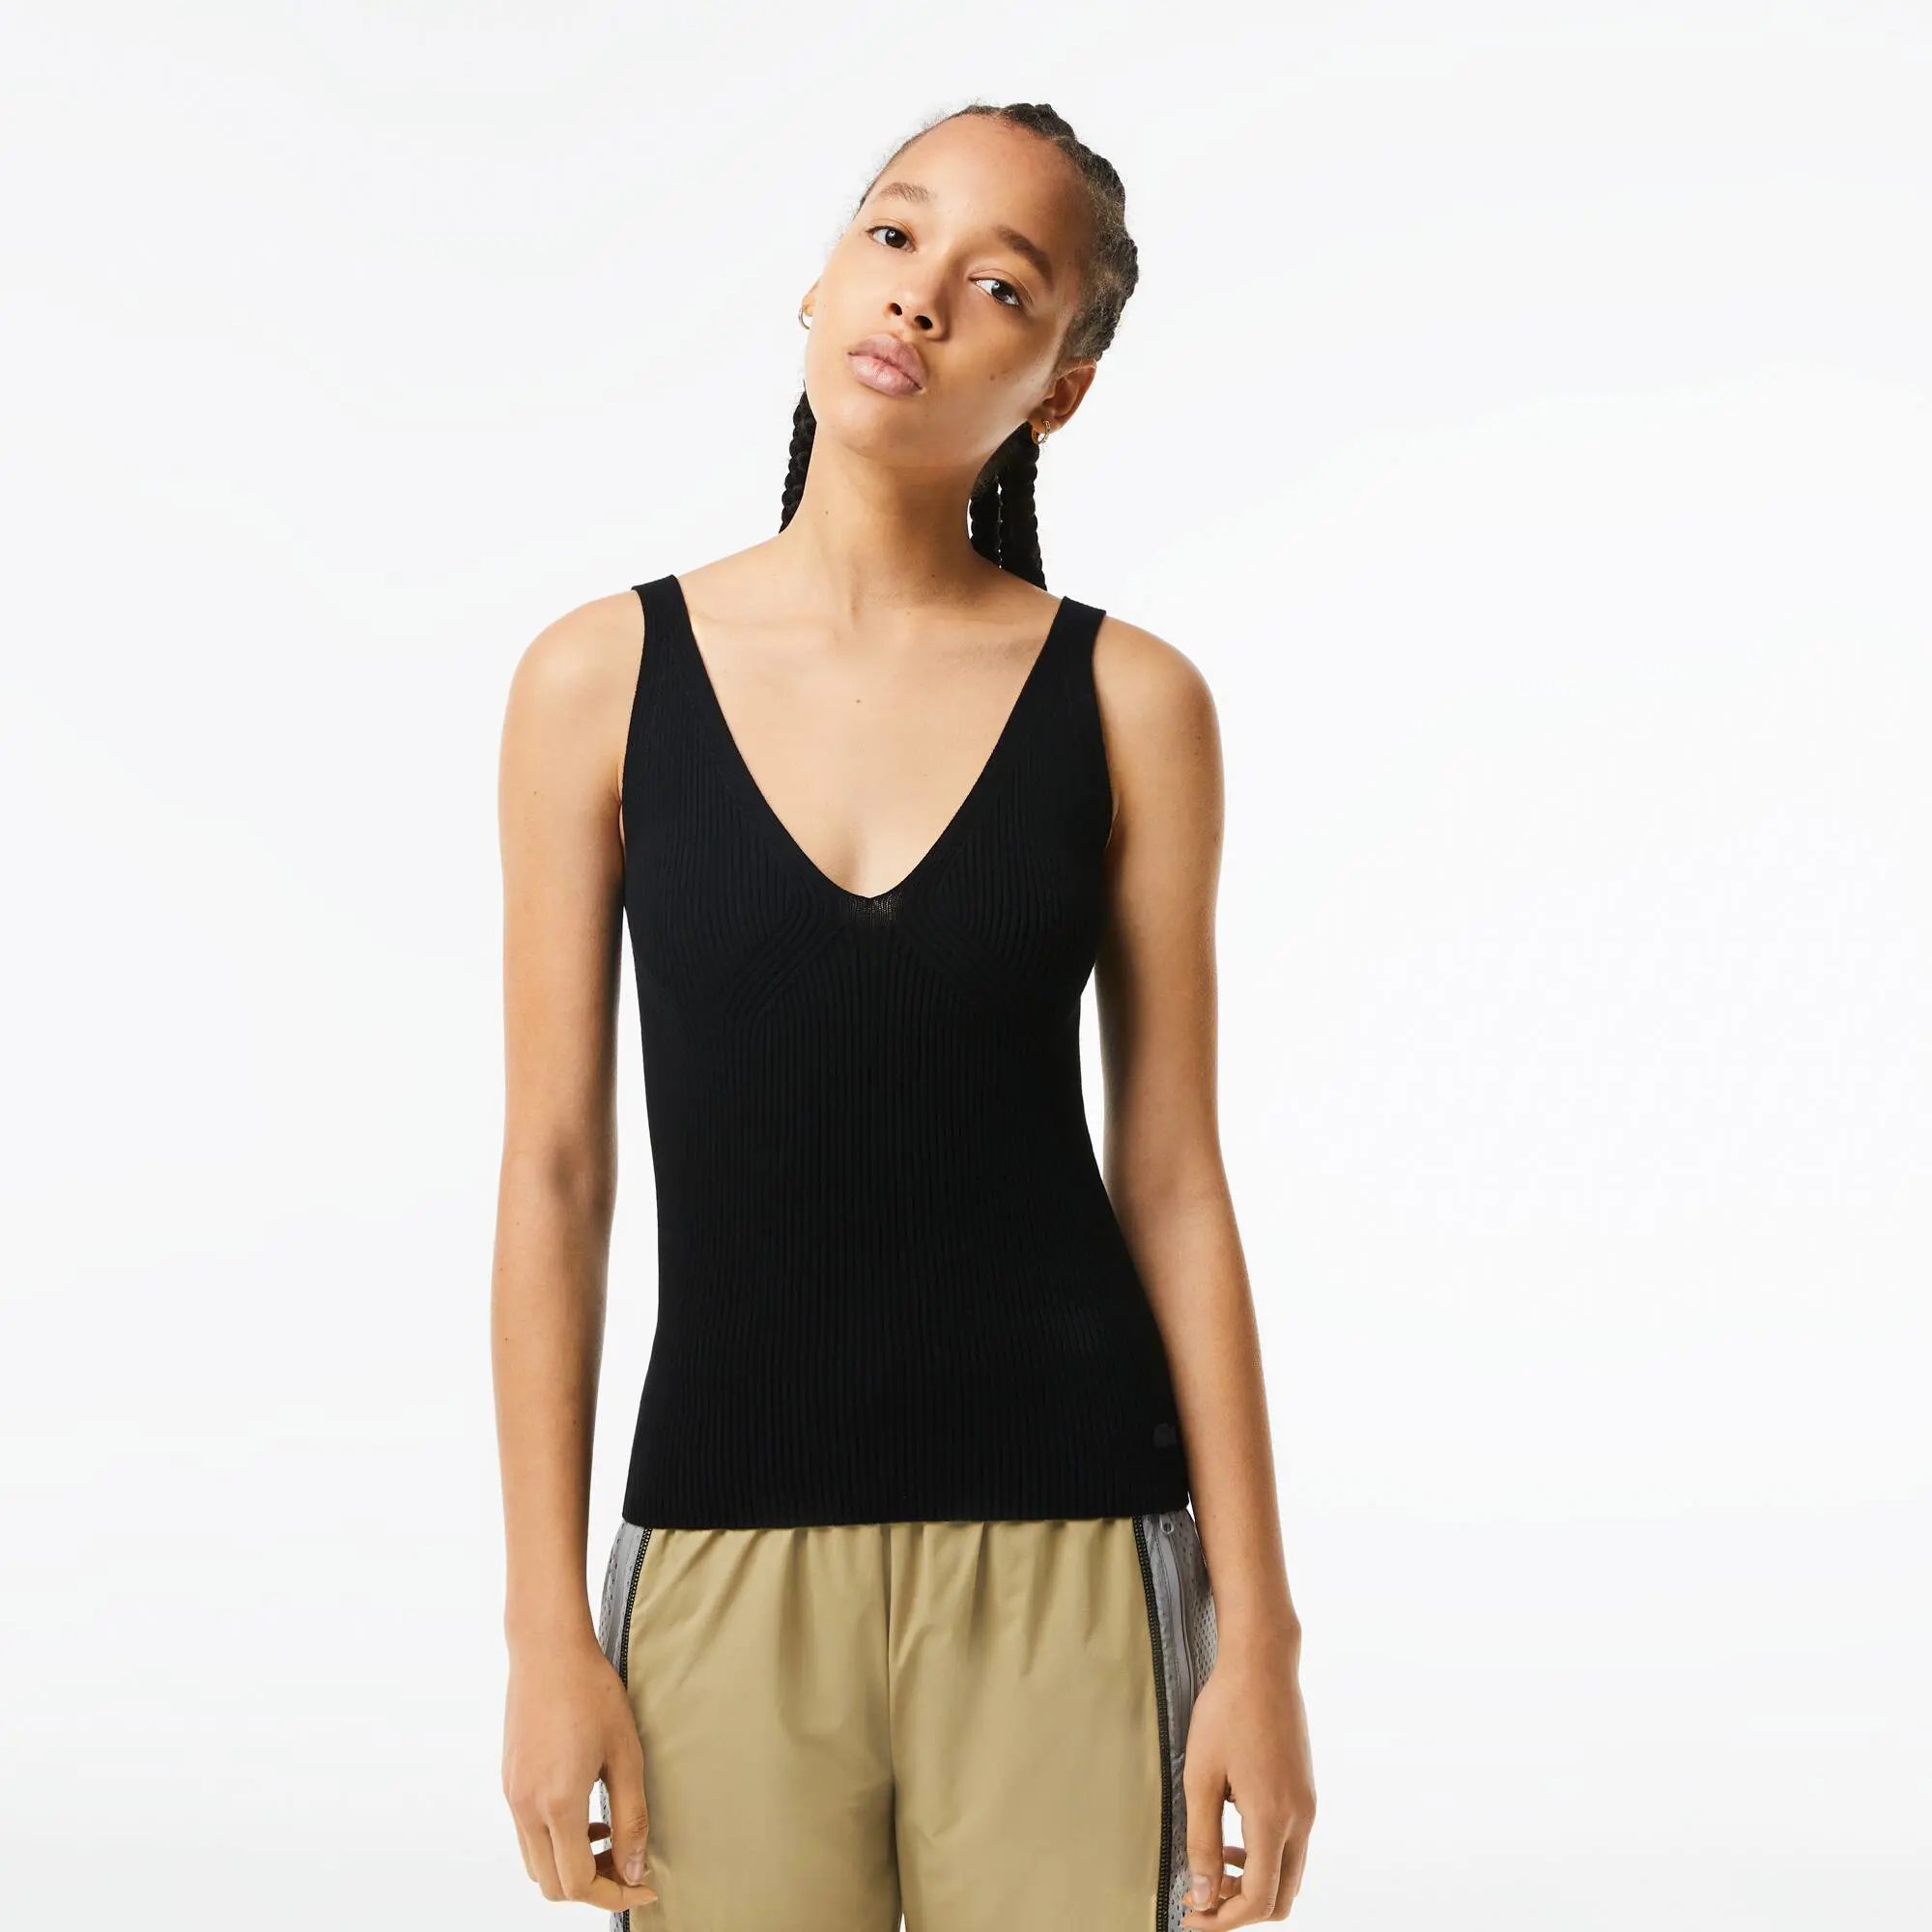 Lacoste Women's Lacoste Seamless Ribbed Knit Tank Top. 1